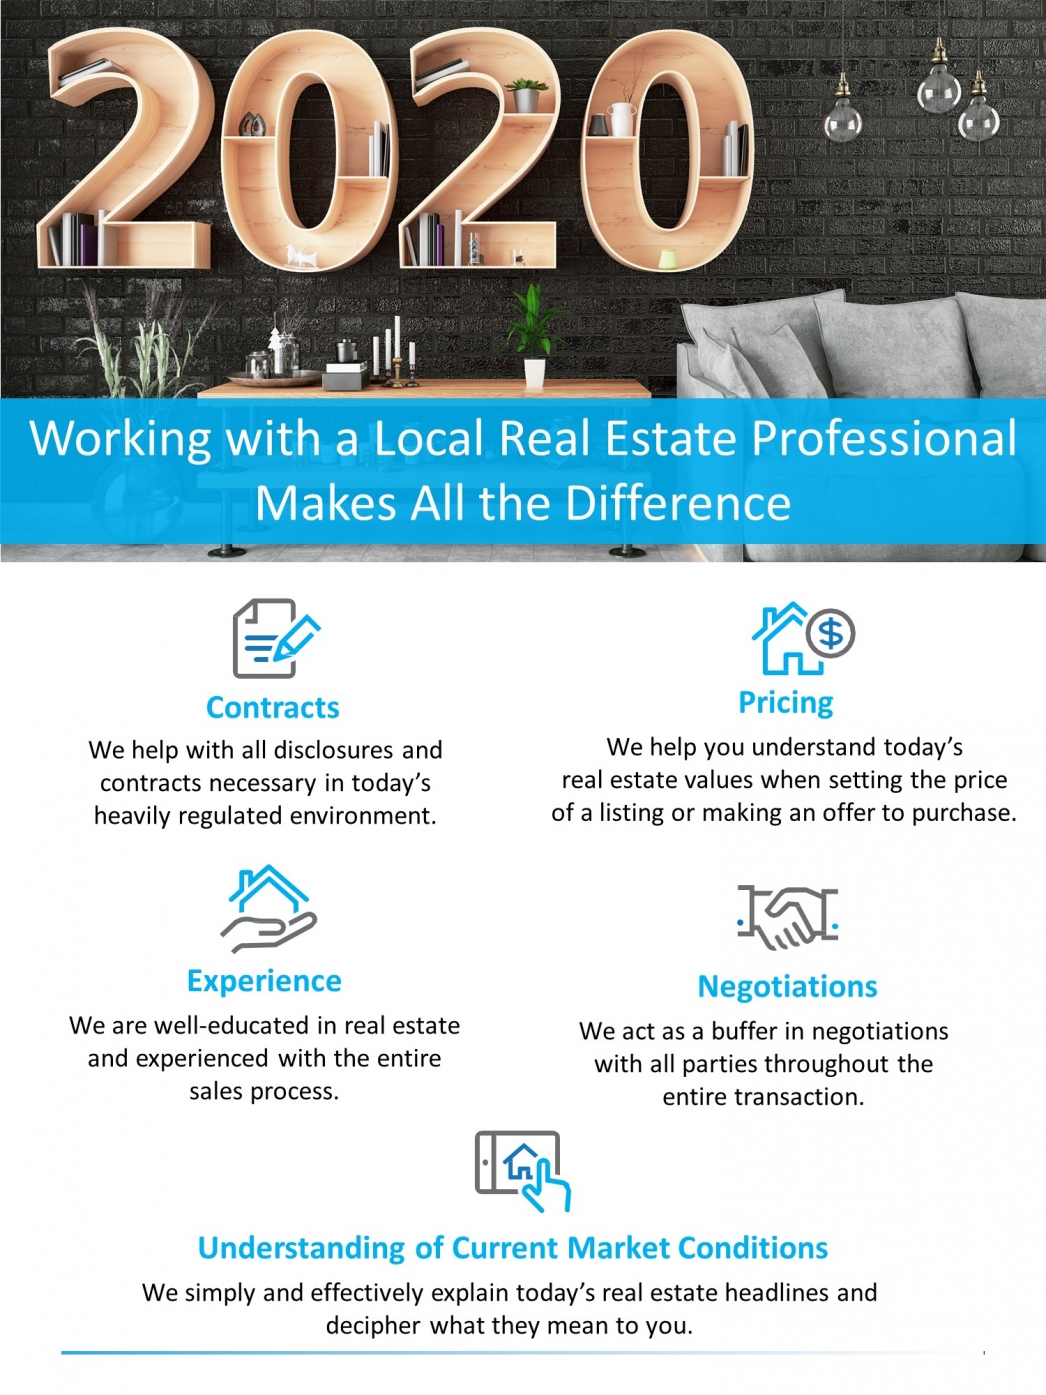 Working with a Local Real Estate Professional Makes All the Difference [INFOGRAPHIC] | MyKCM